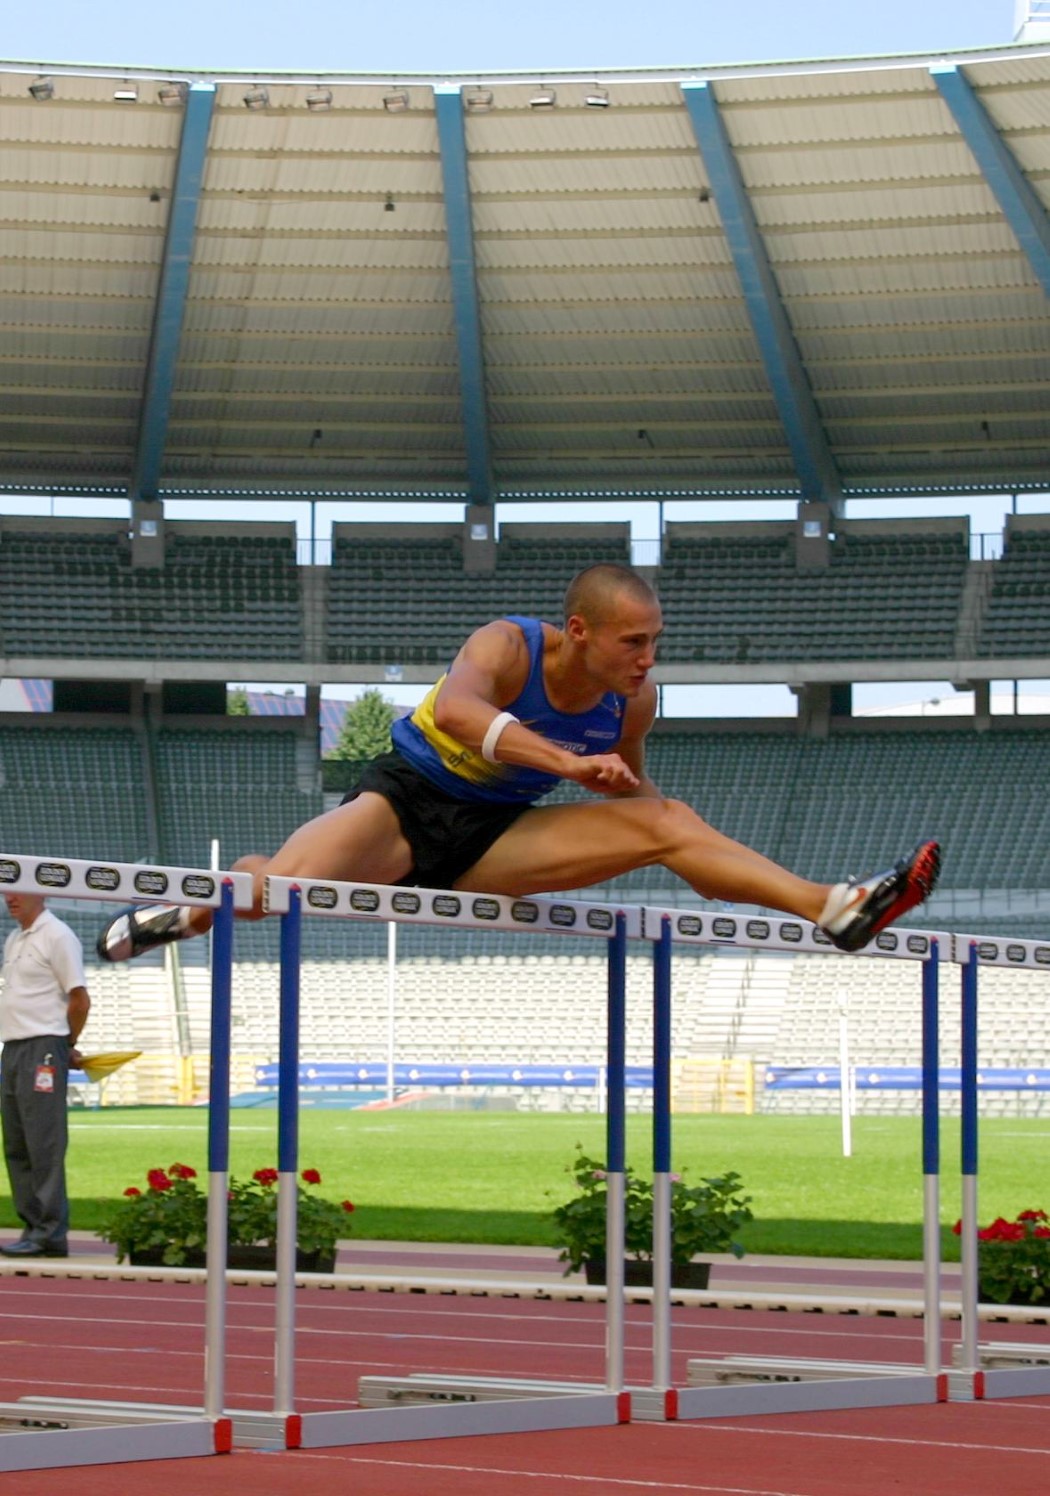 an athlete leaps over an obstacle in an athletics stadium